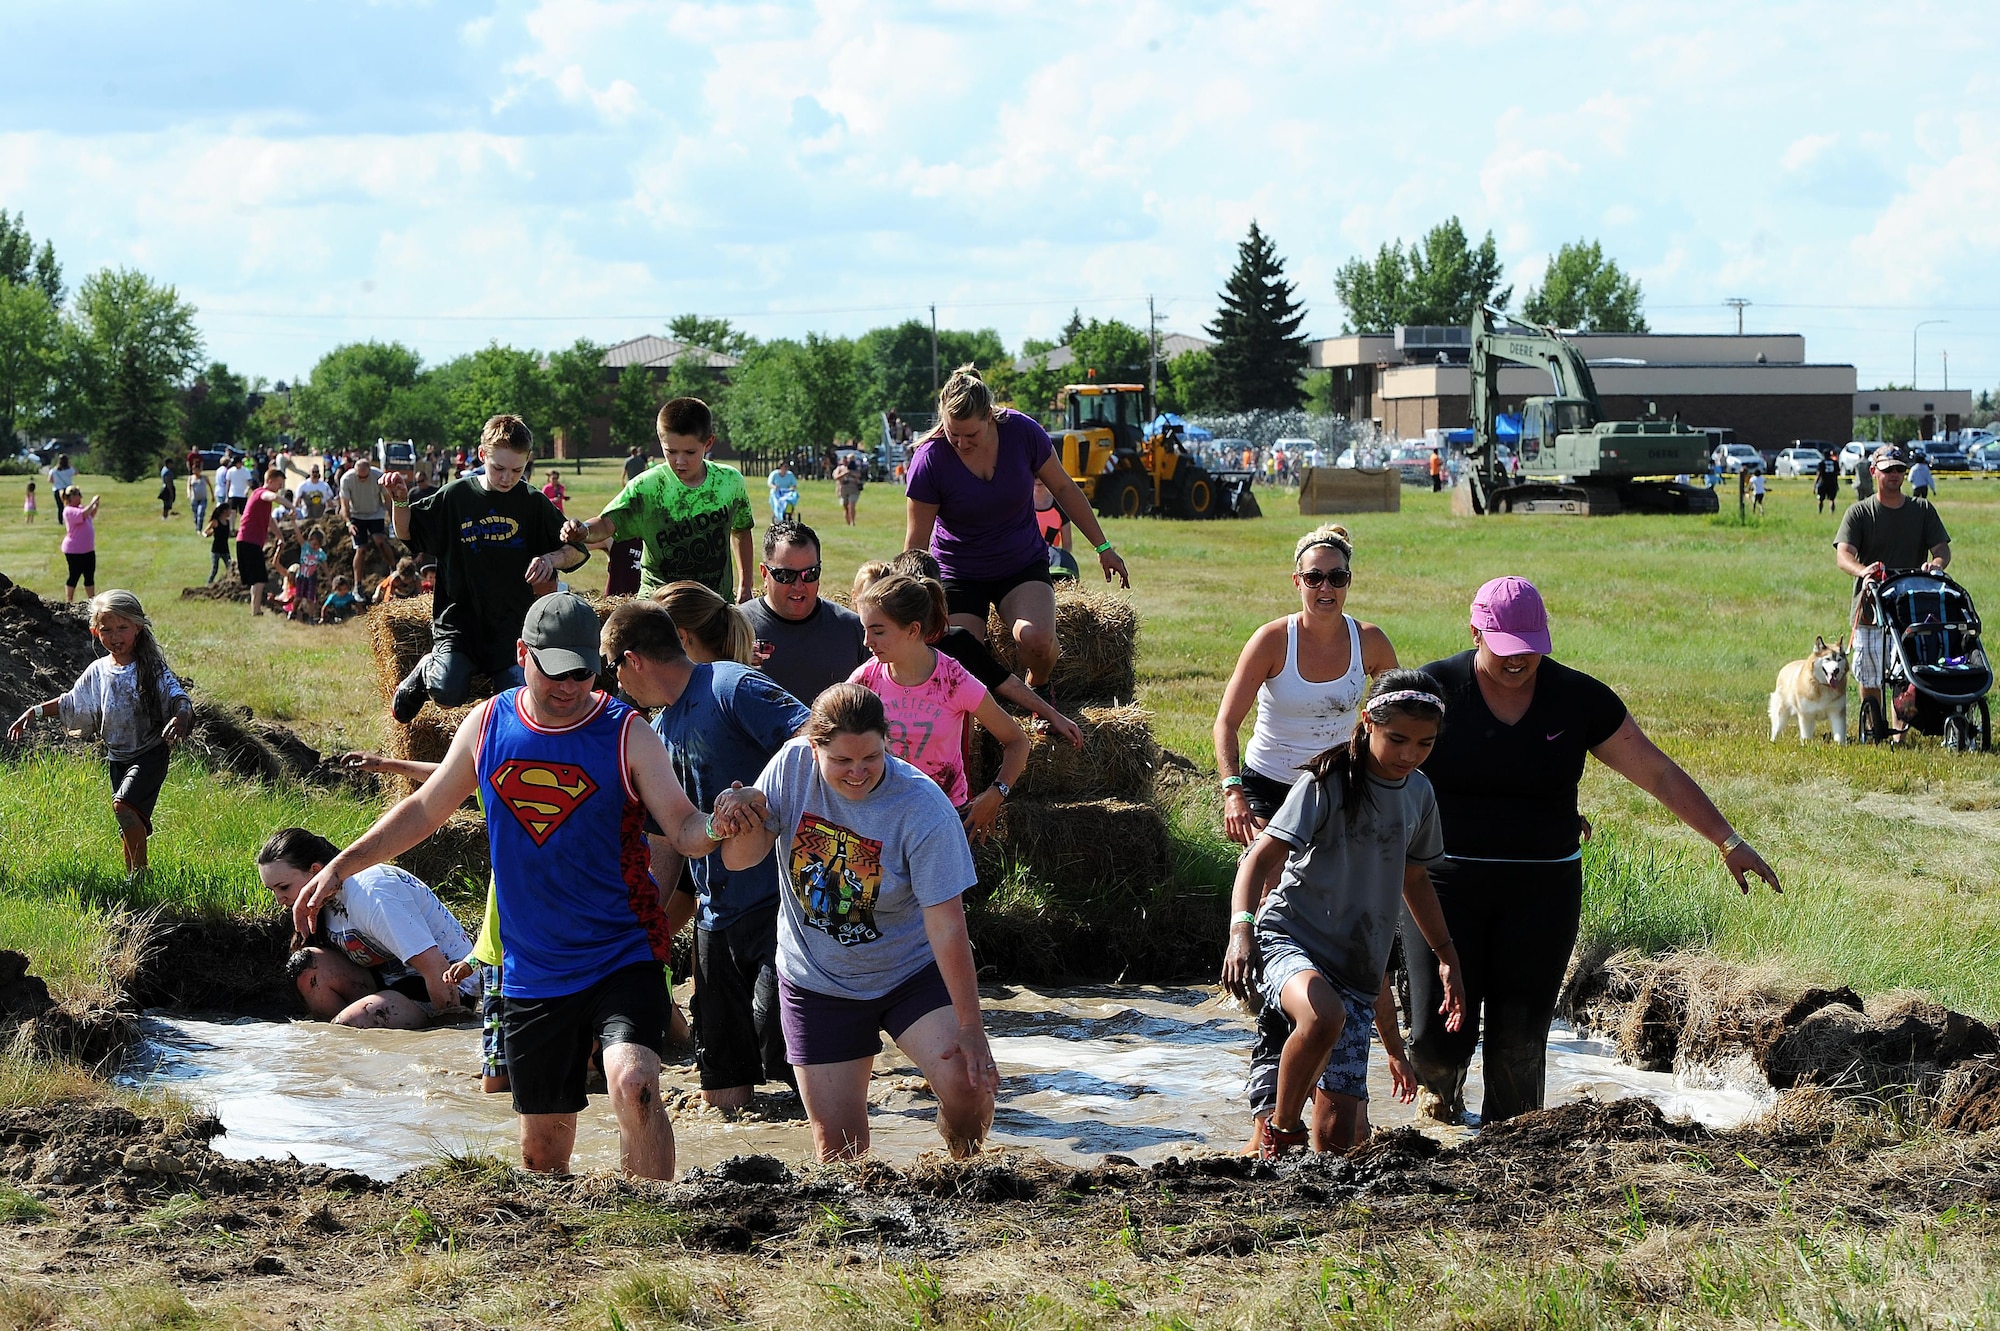 Members of Team Minot participate in the 2016 Mini Mudder, July 15, 2016 at Minot Air Force Base, N.D. Approximately 900 Airmen and their families attend the event, which lasted 2 hours. (U.S. Air Force photo/Senior Airman Kristoffer Kaubisch)